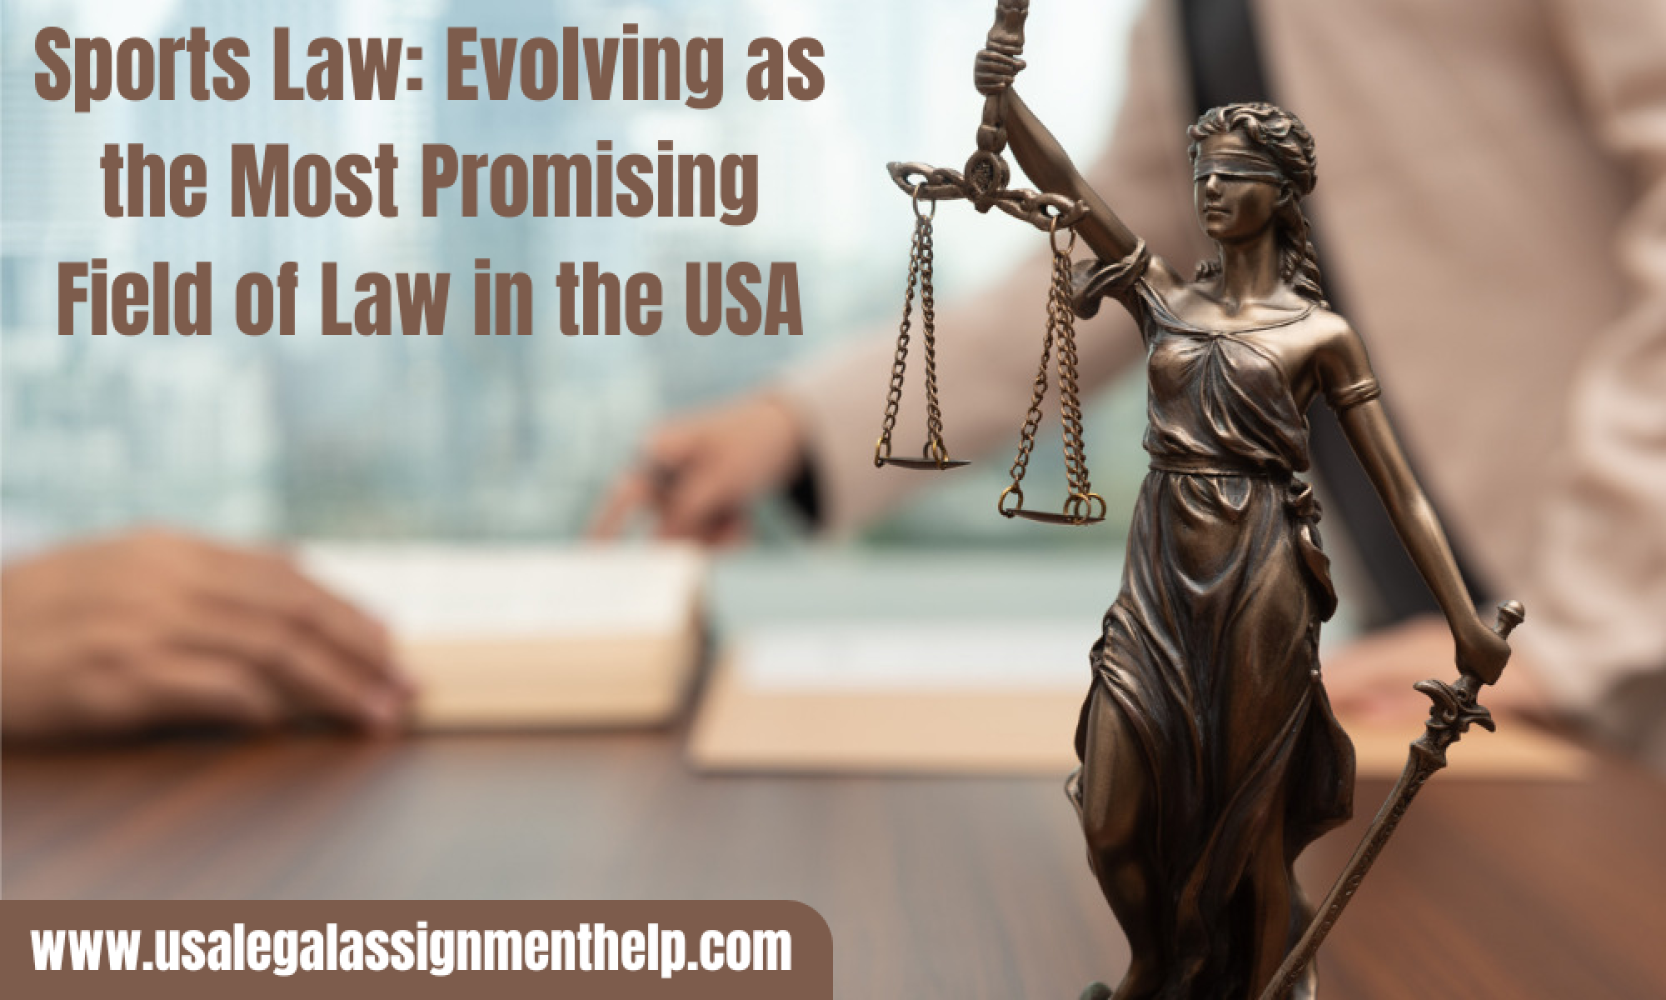 Sports Law: Evolving as the most promising field of law in the USA